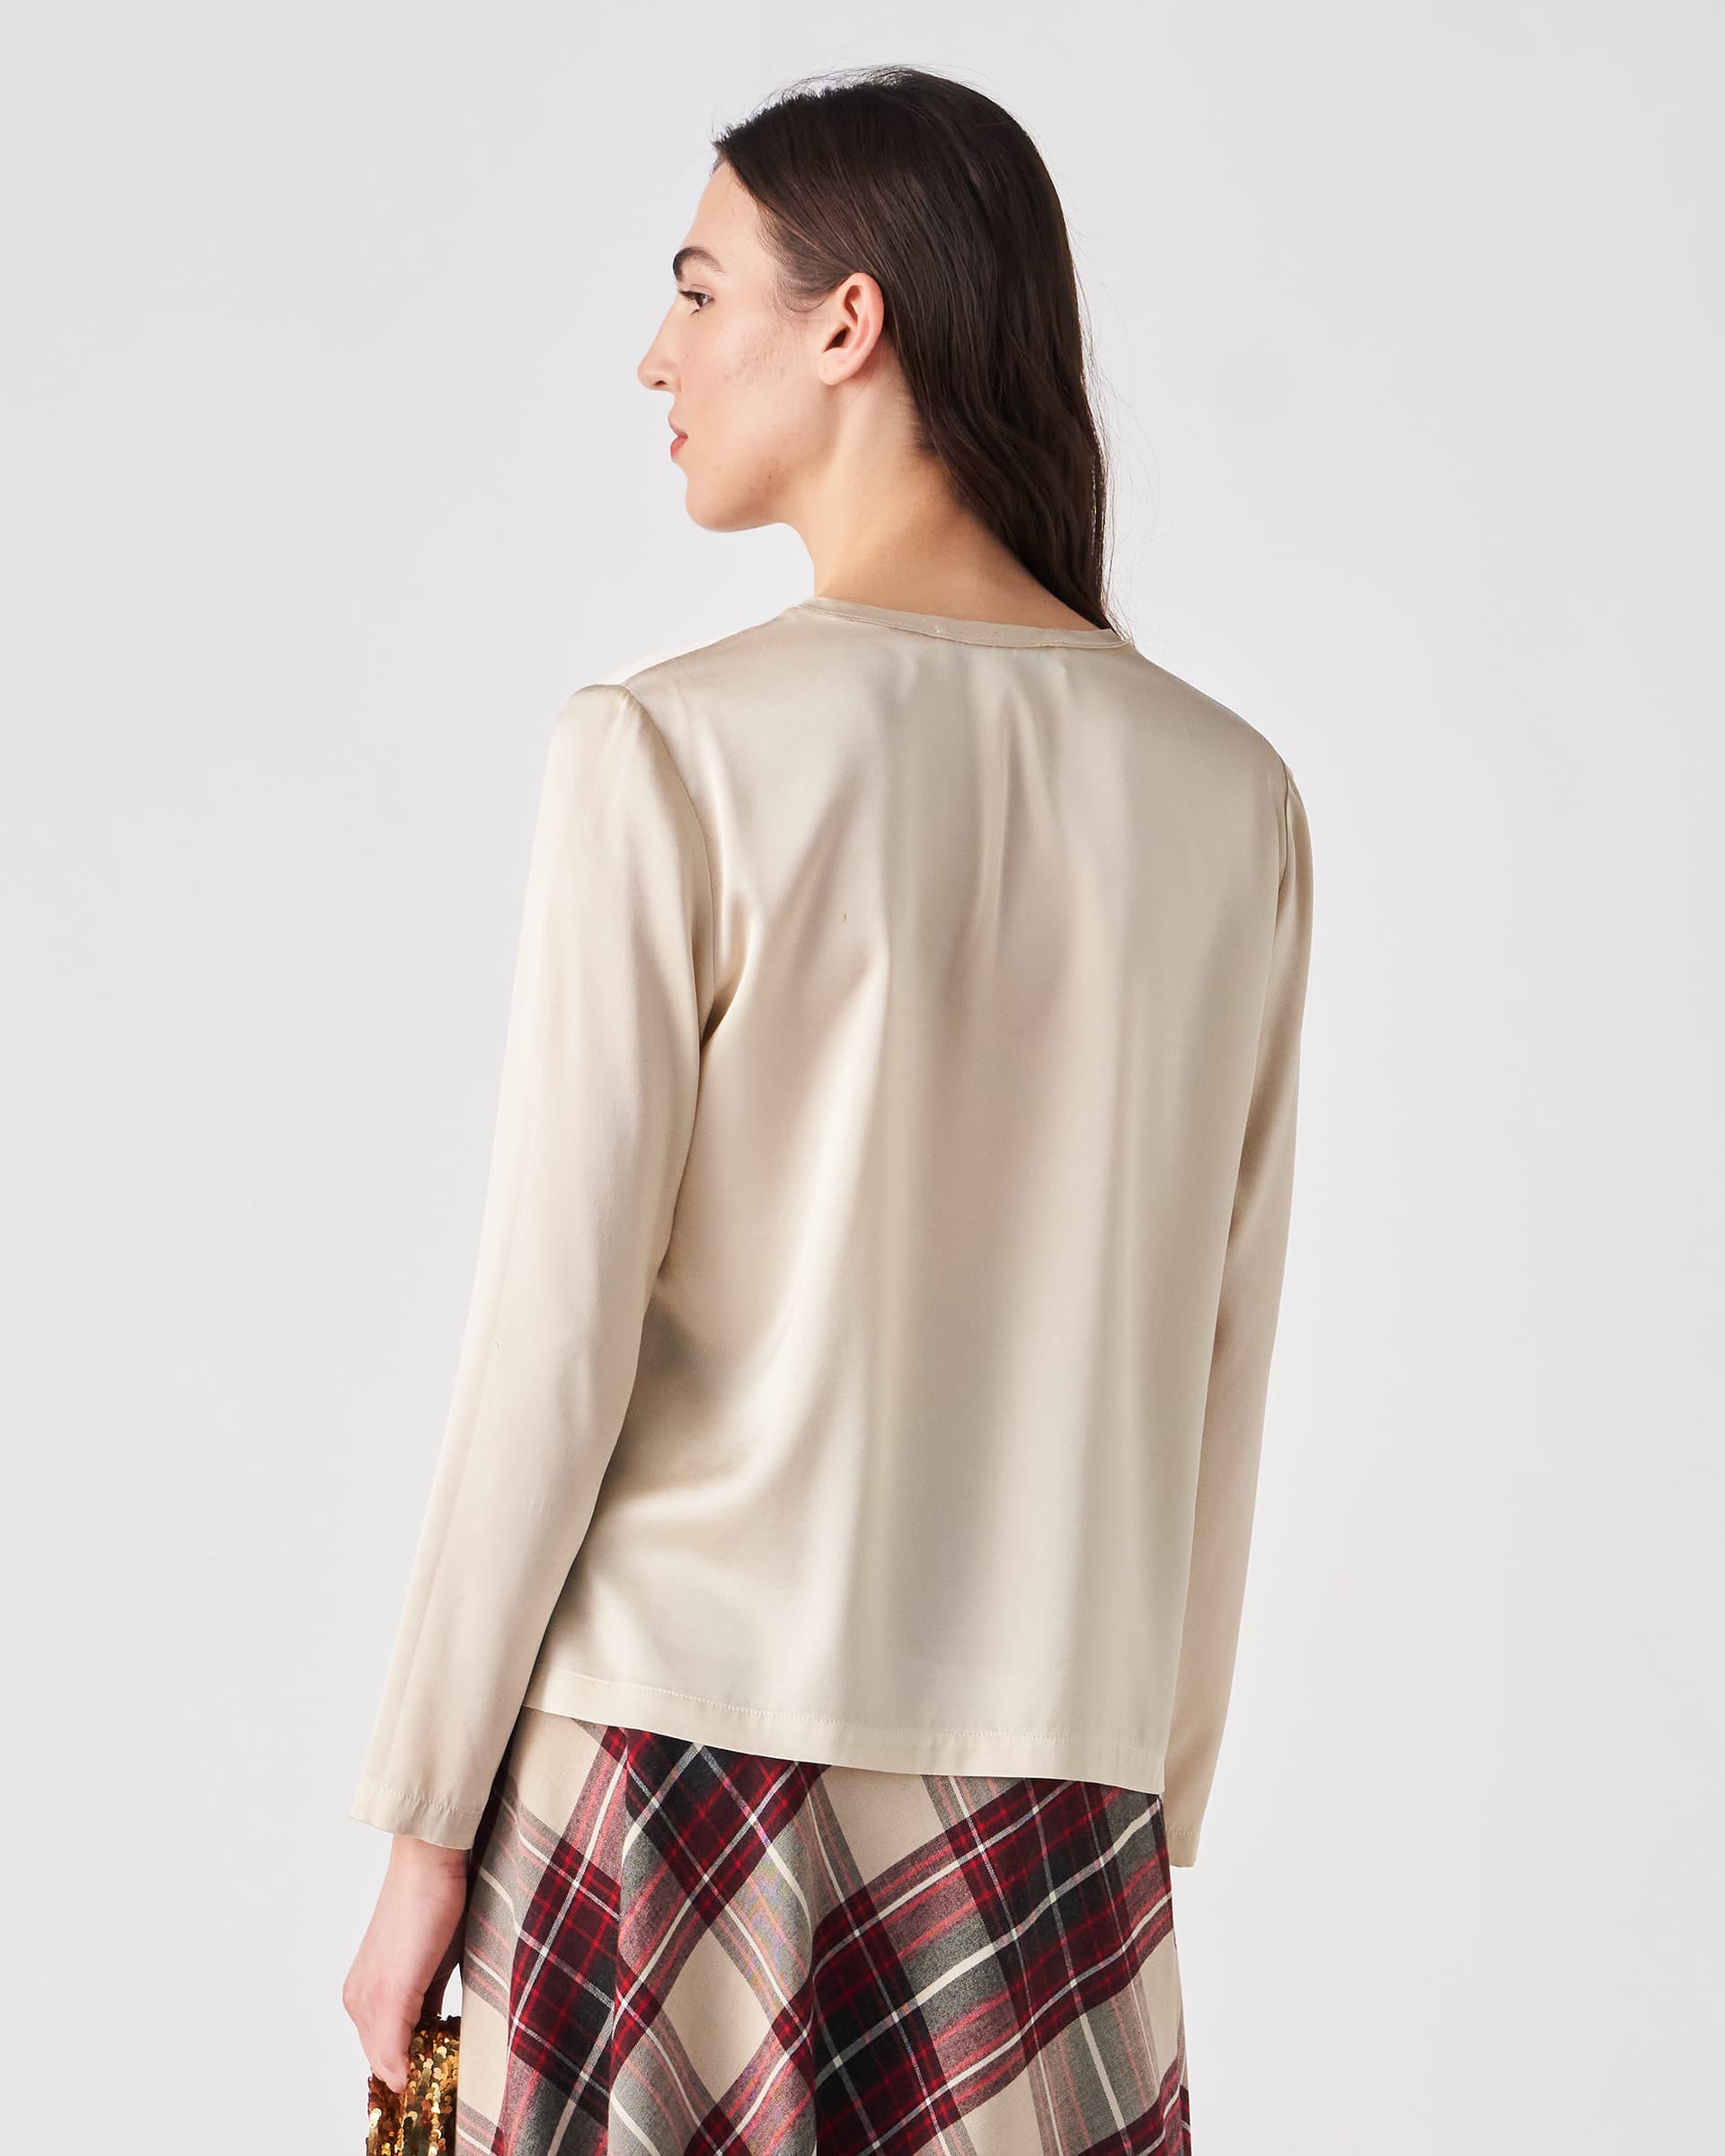 The Market Store | Long Sleeve Crew Neck Blouse